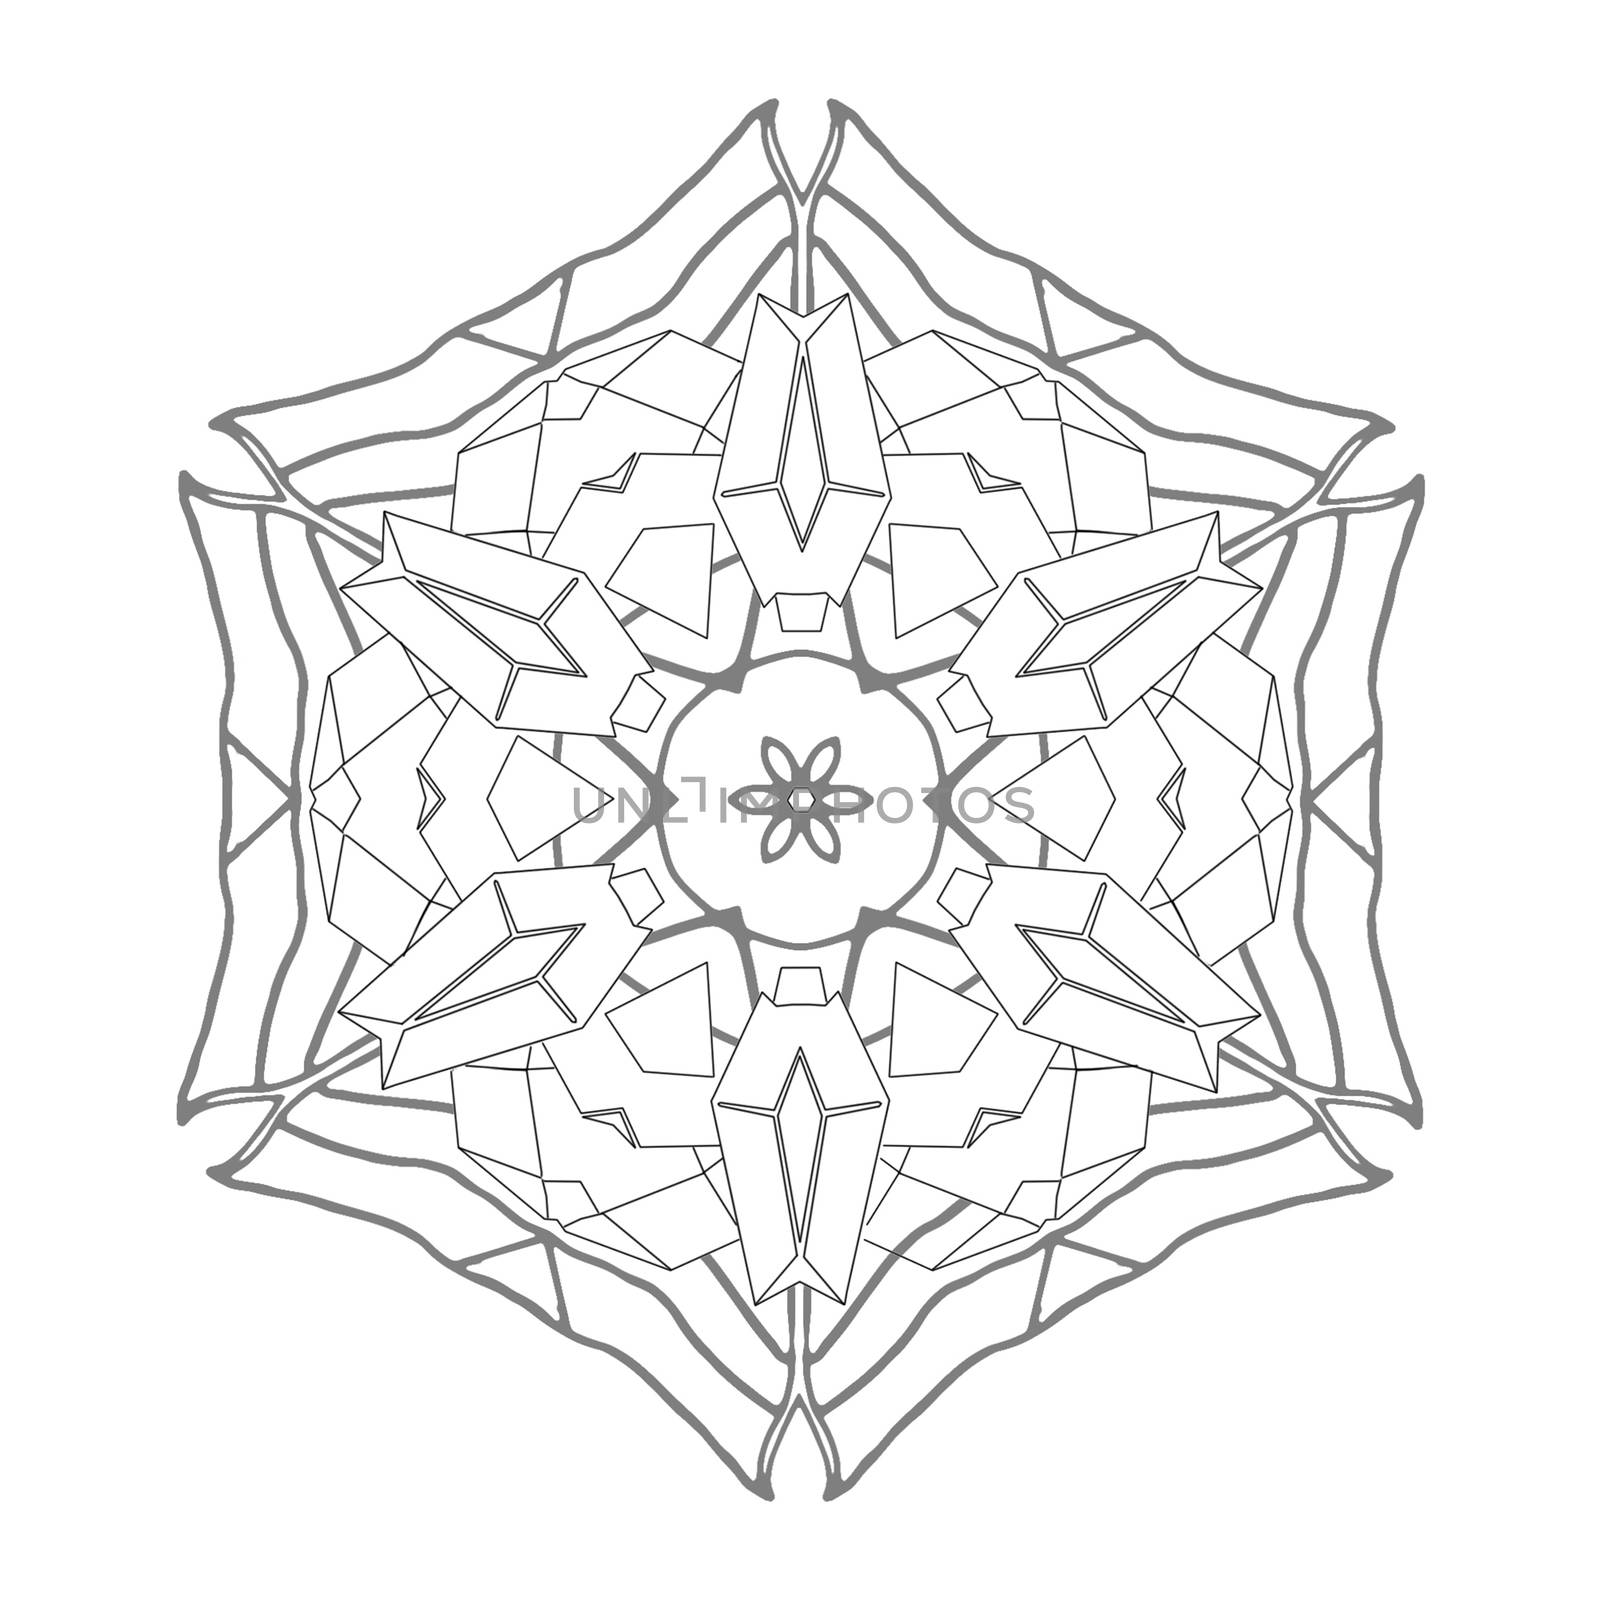 Illustration: Coloring Book Series: Magnificent Diamond Flower. Soft line. Print it and bring it to Life with Color! Fantastic Outline / Sketch / Line Art Design.